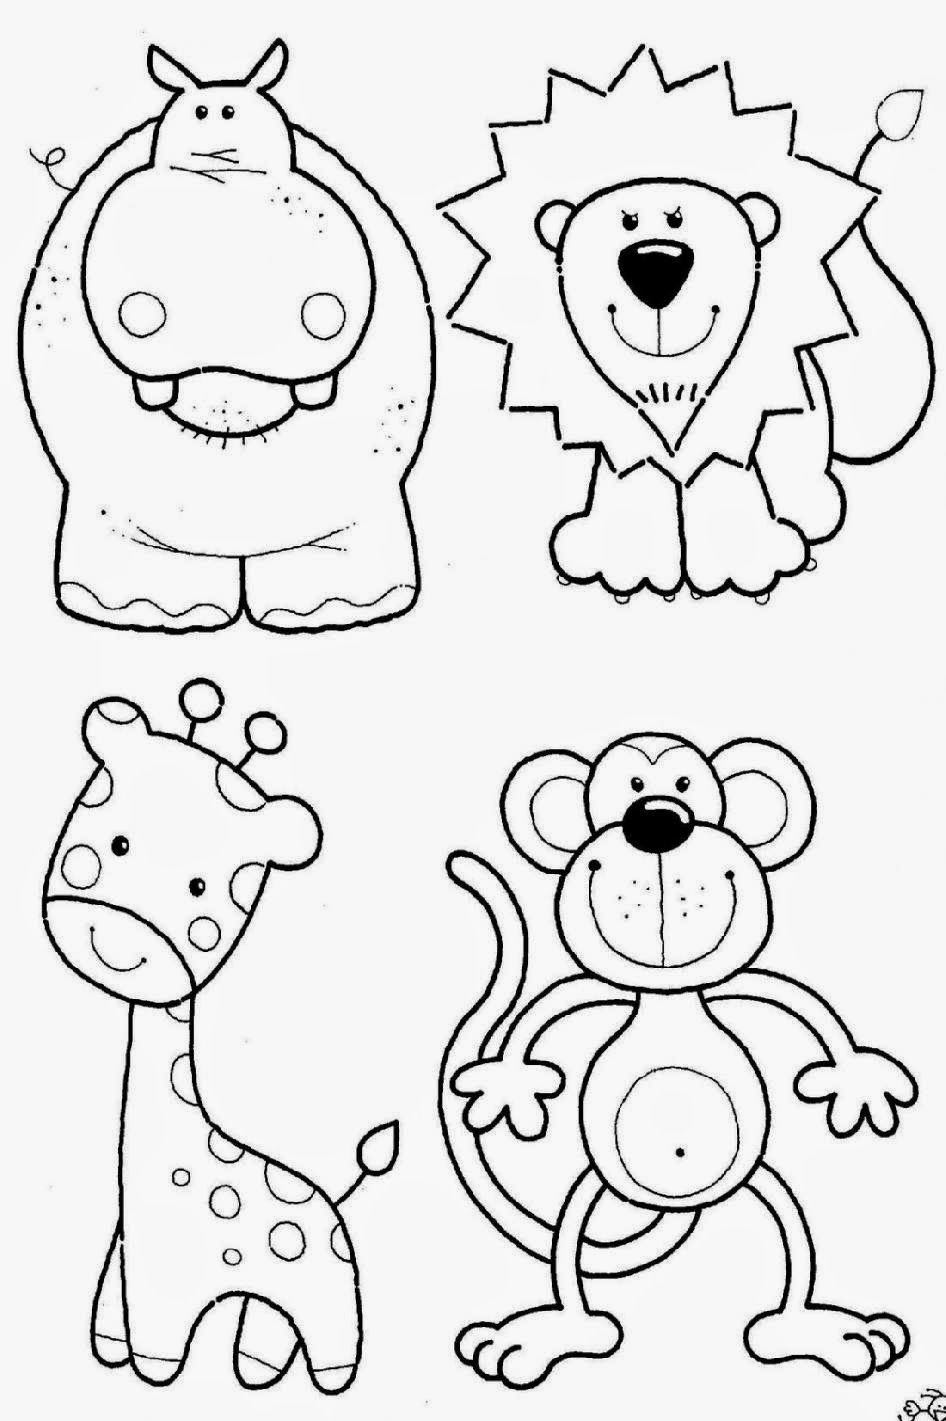 Coloring Pages For Kids | Free Coloring Pictures